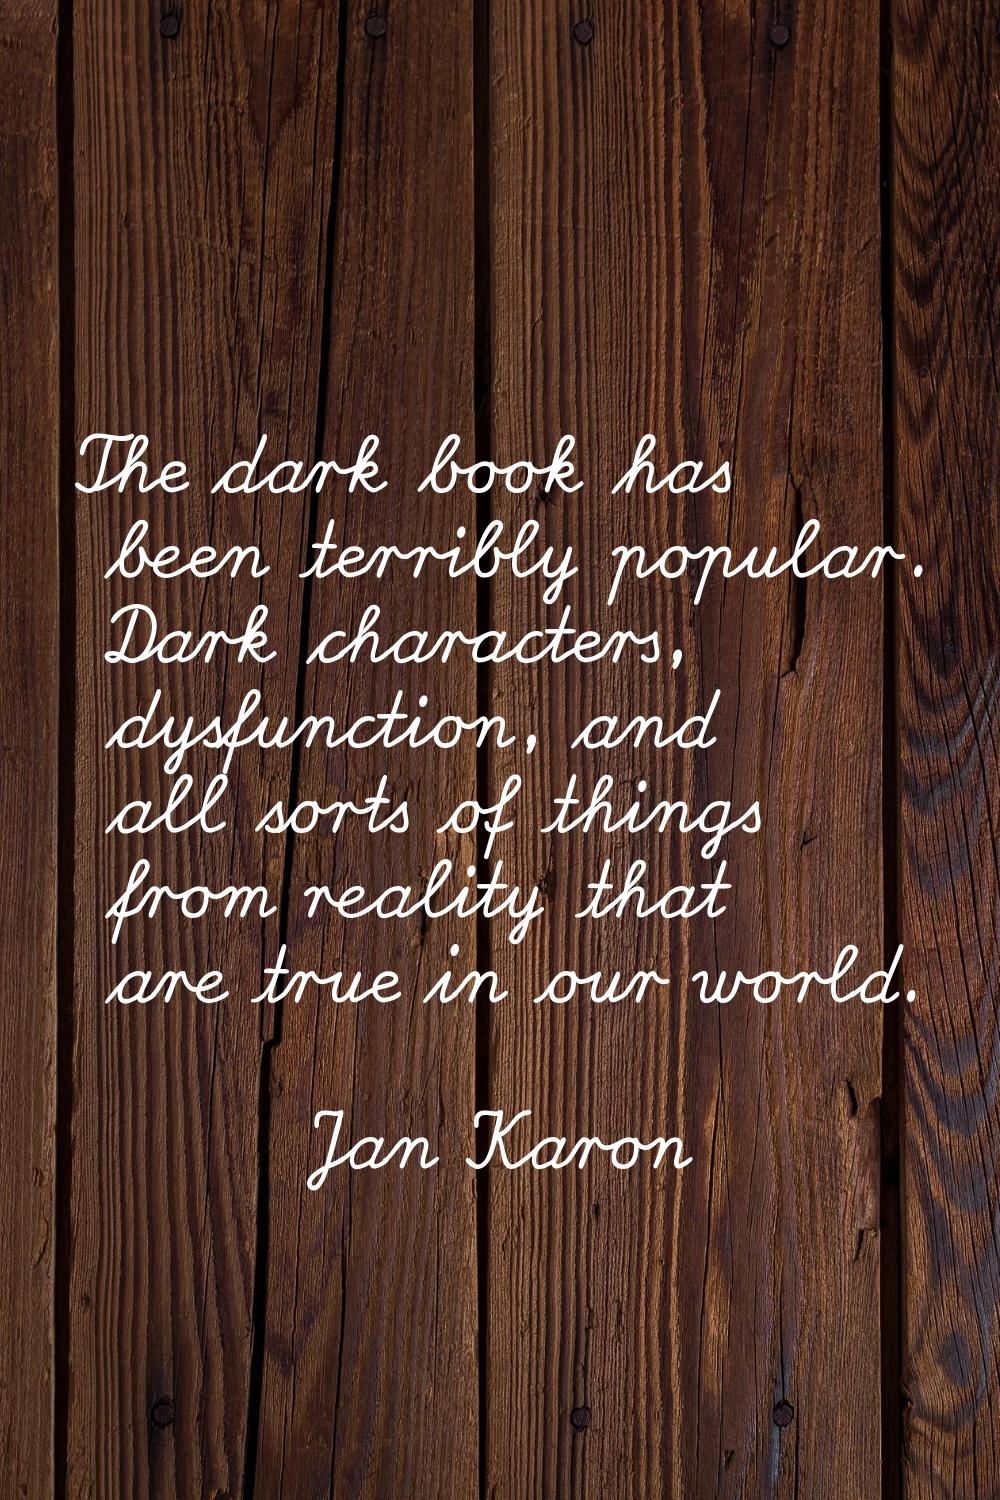 The dark book has been terribly popular. Dark characters, dysfunction, and all sorts of things from